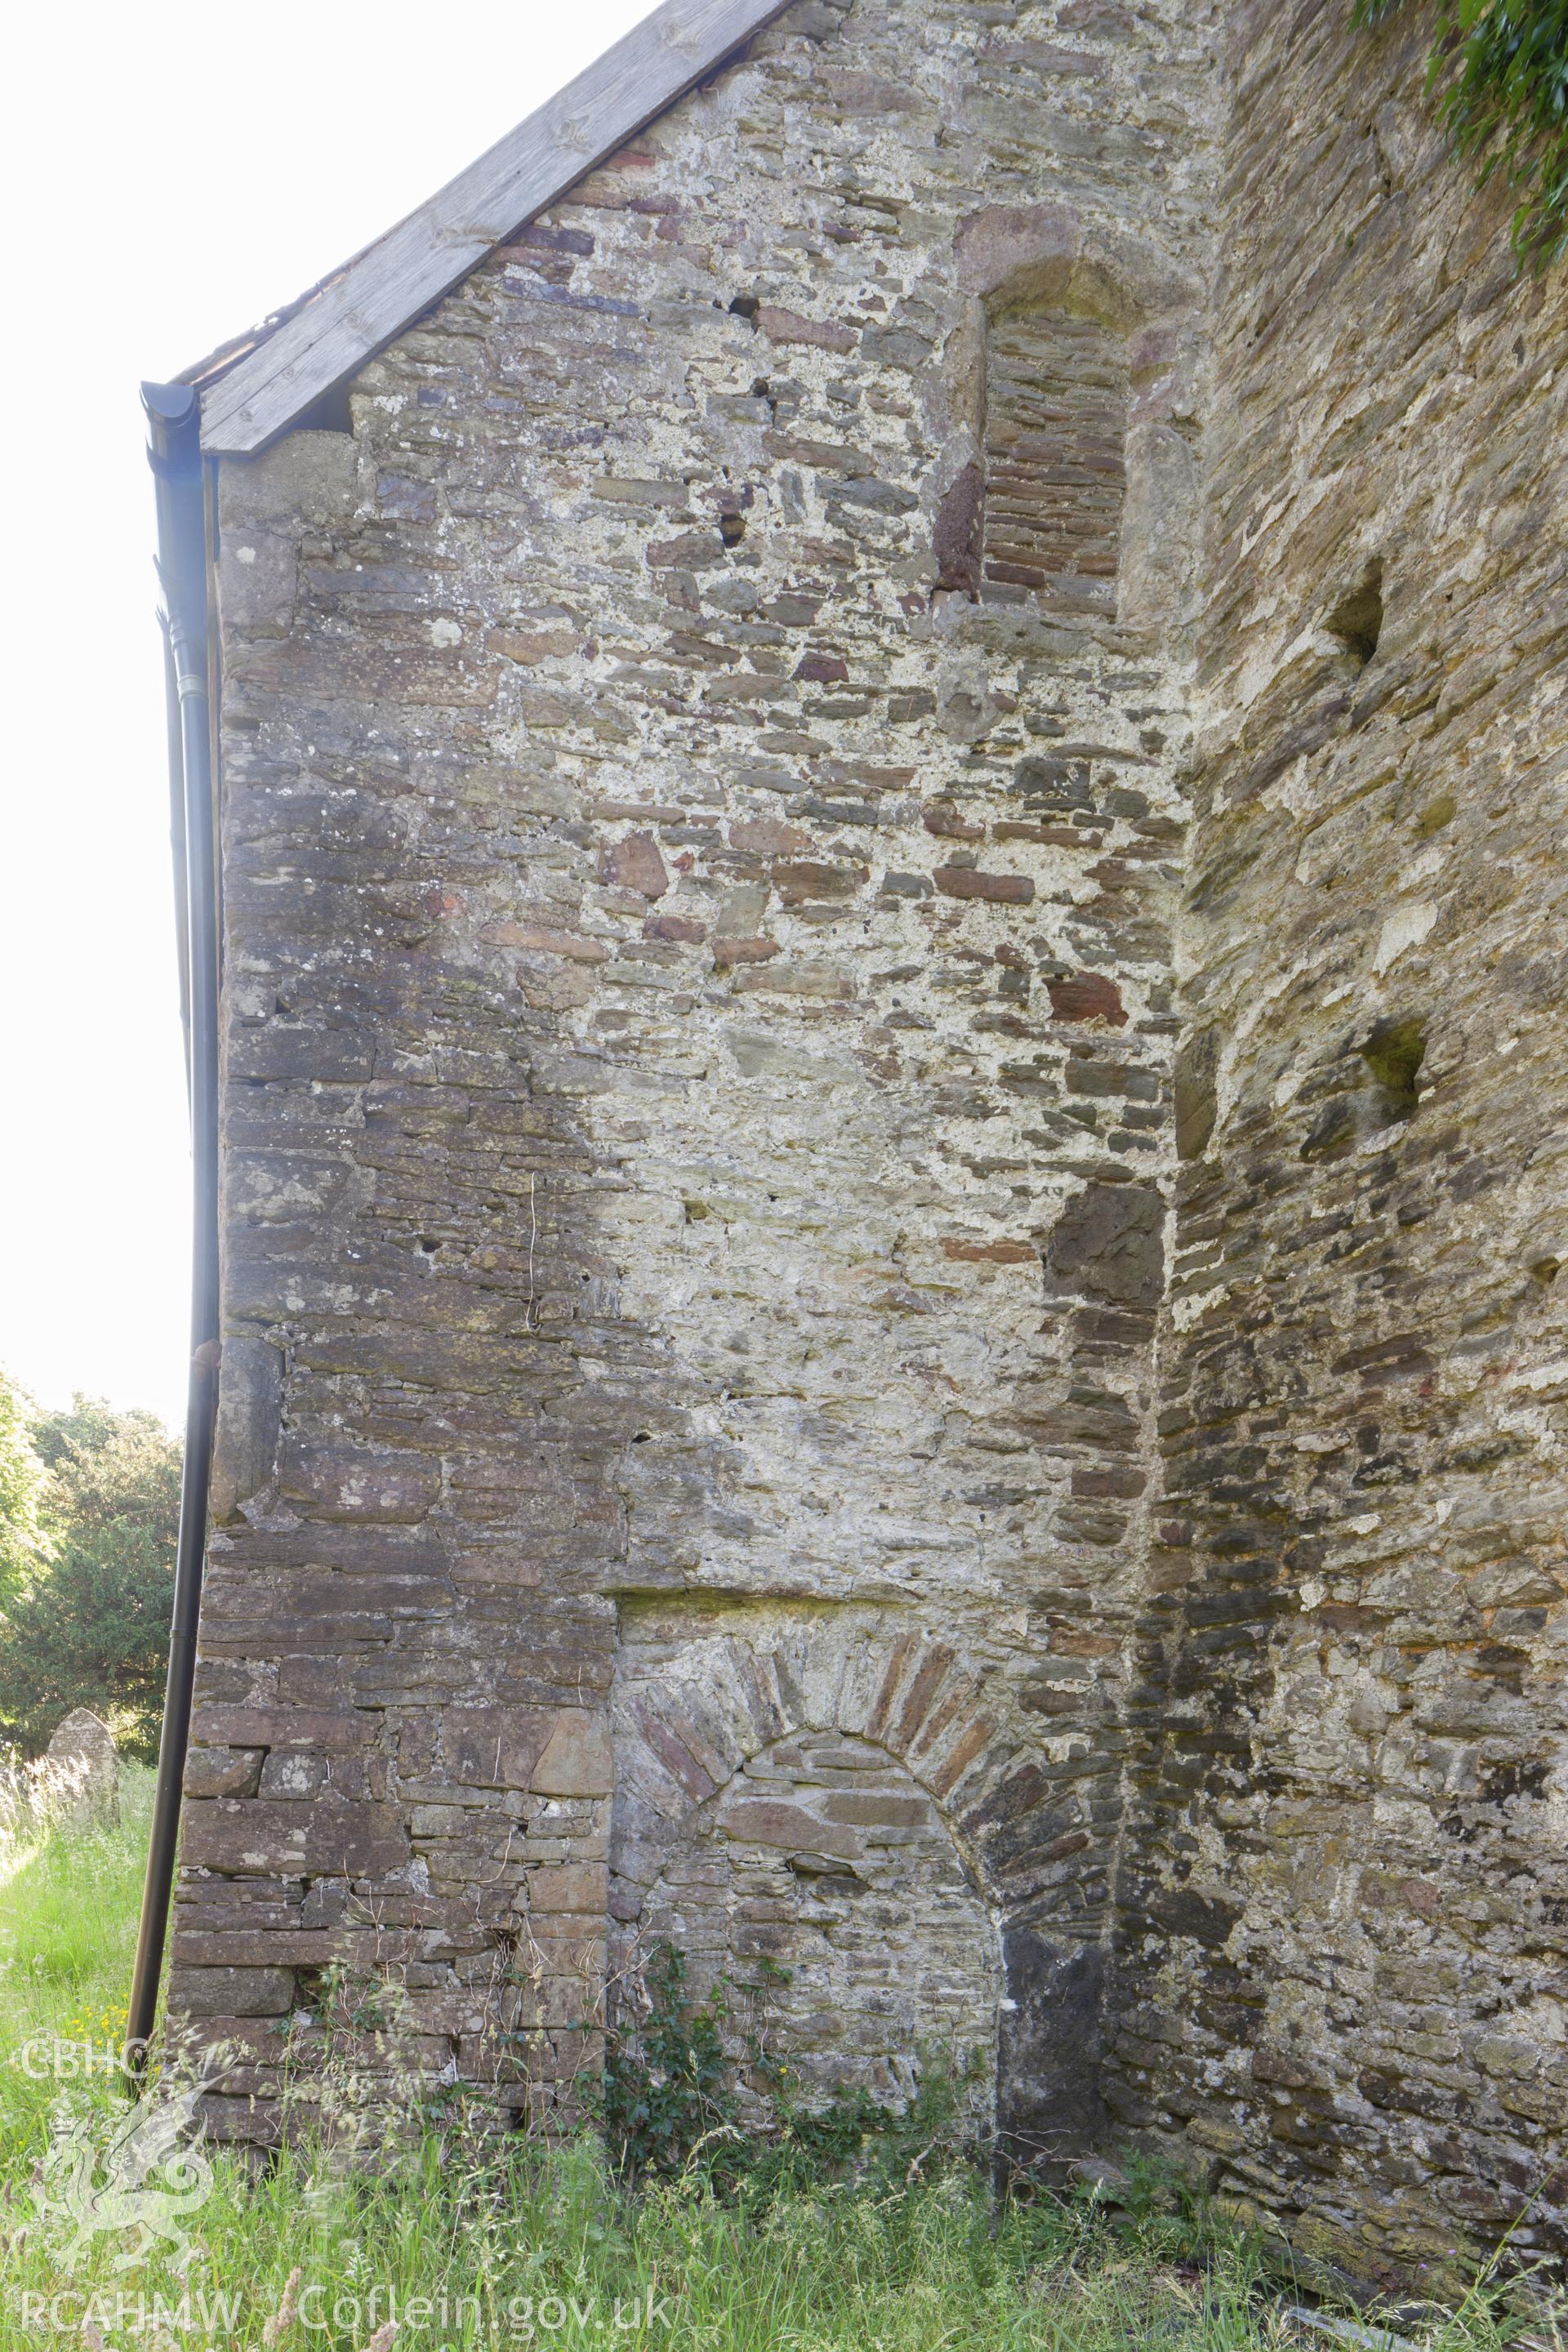 Blocked openings behind the tower on the west wall